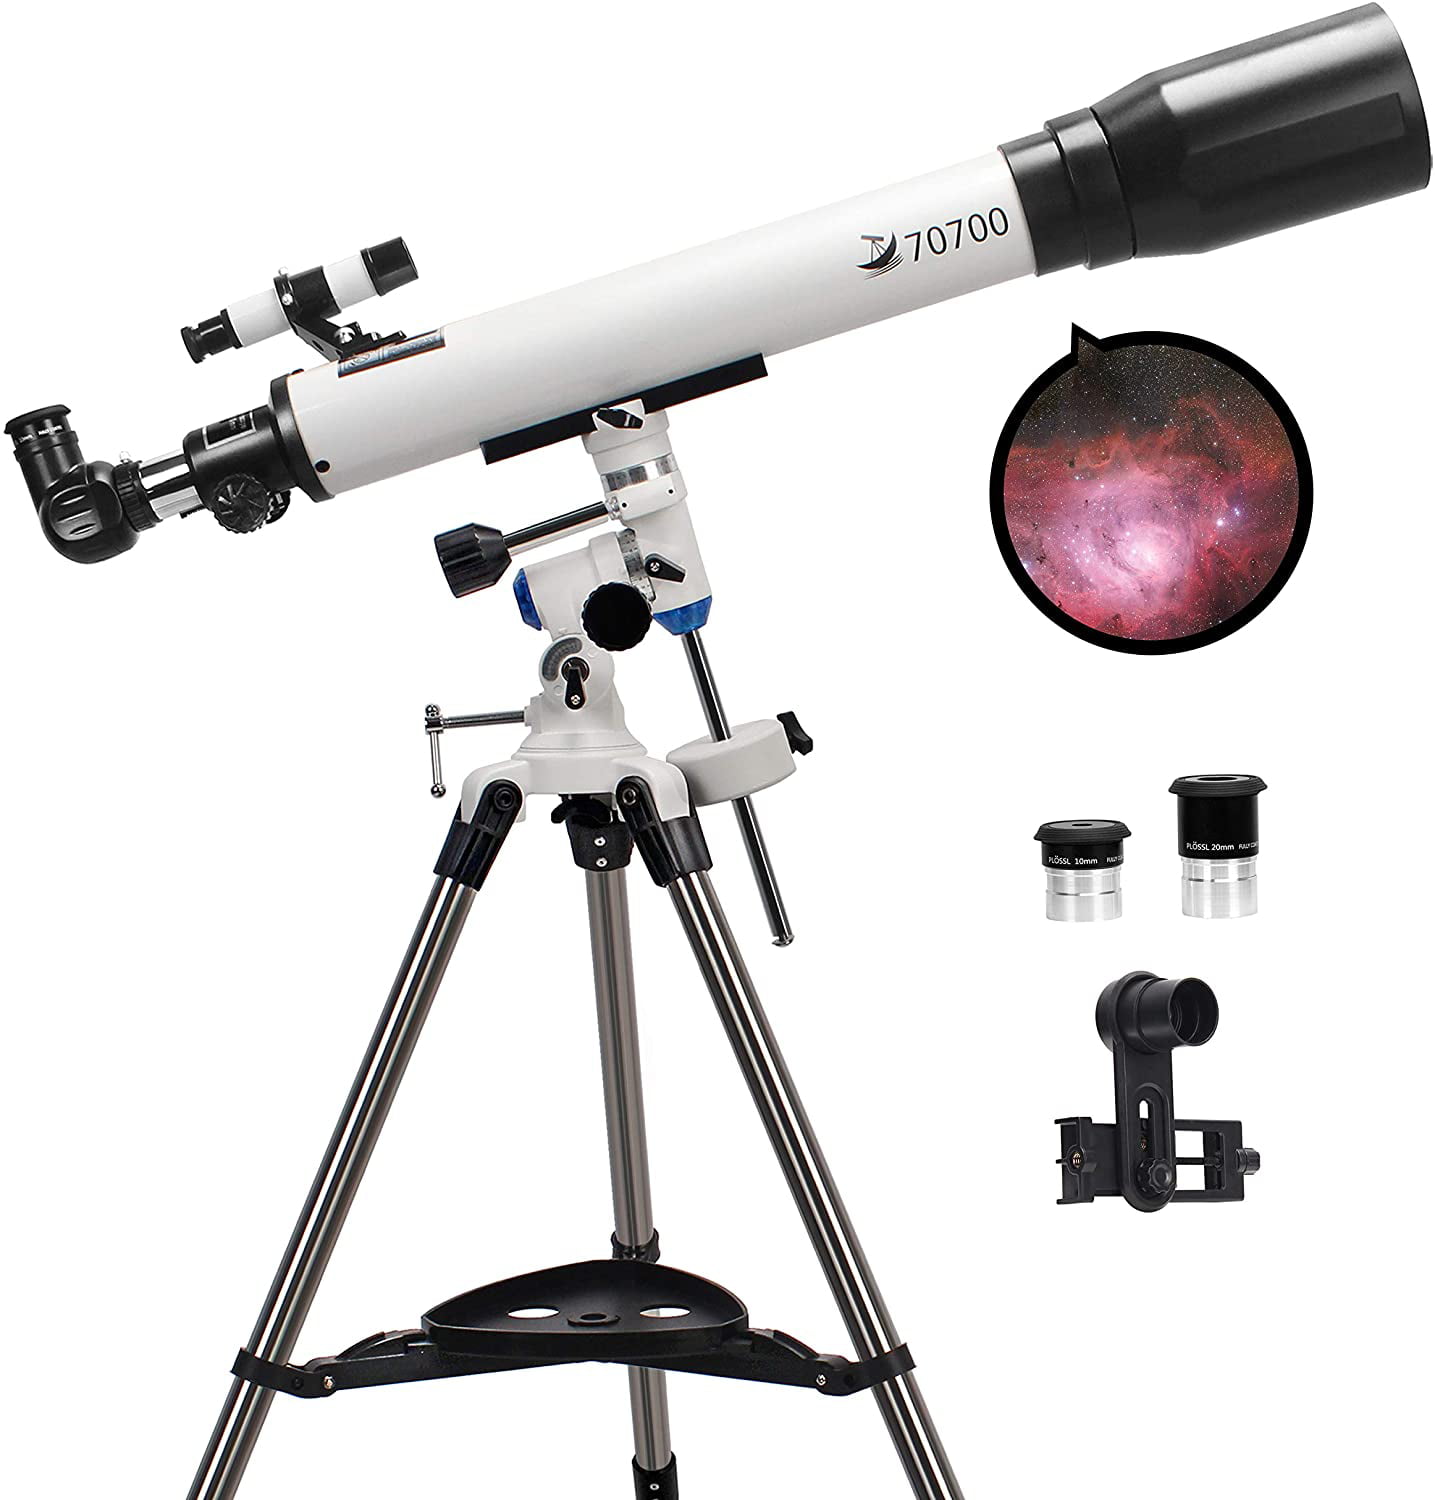 HUWAI Telescope for Beginners Telescopes for Adults Fully Multi-Coated Optics 70Mm Aperture Astronomy Refractor Telescope Portable Travel Scope with Tripod 